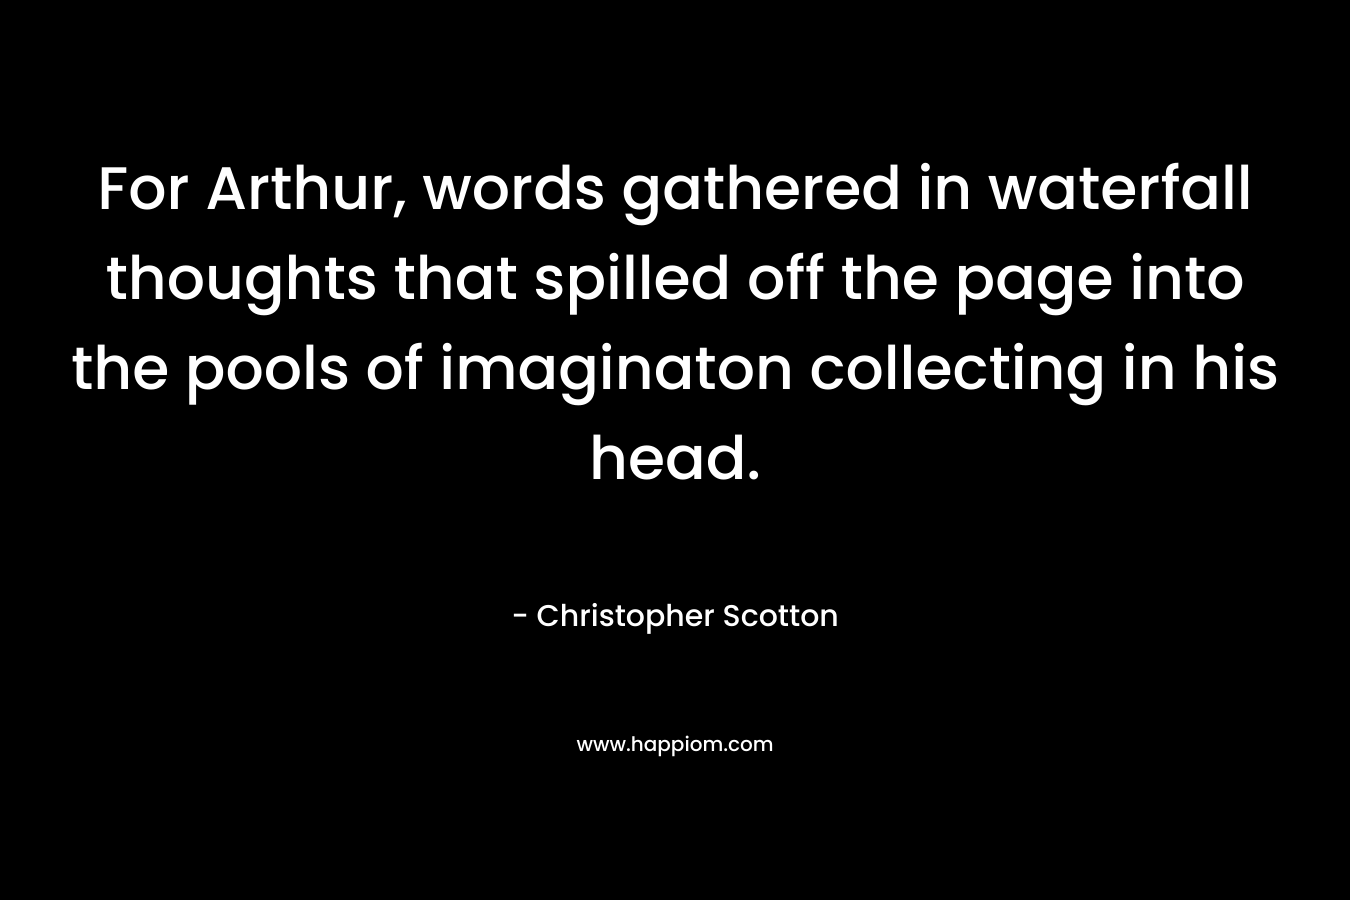 For Arthur, words gathered in waterfall thoughts that spilled off the page into the pools of imaginaton collecting in his head. – Christopher Scotton